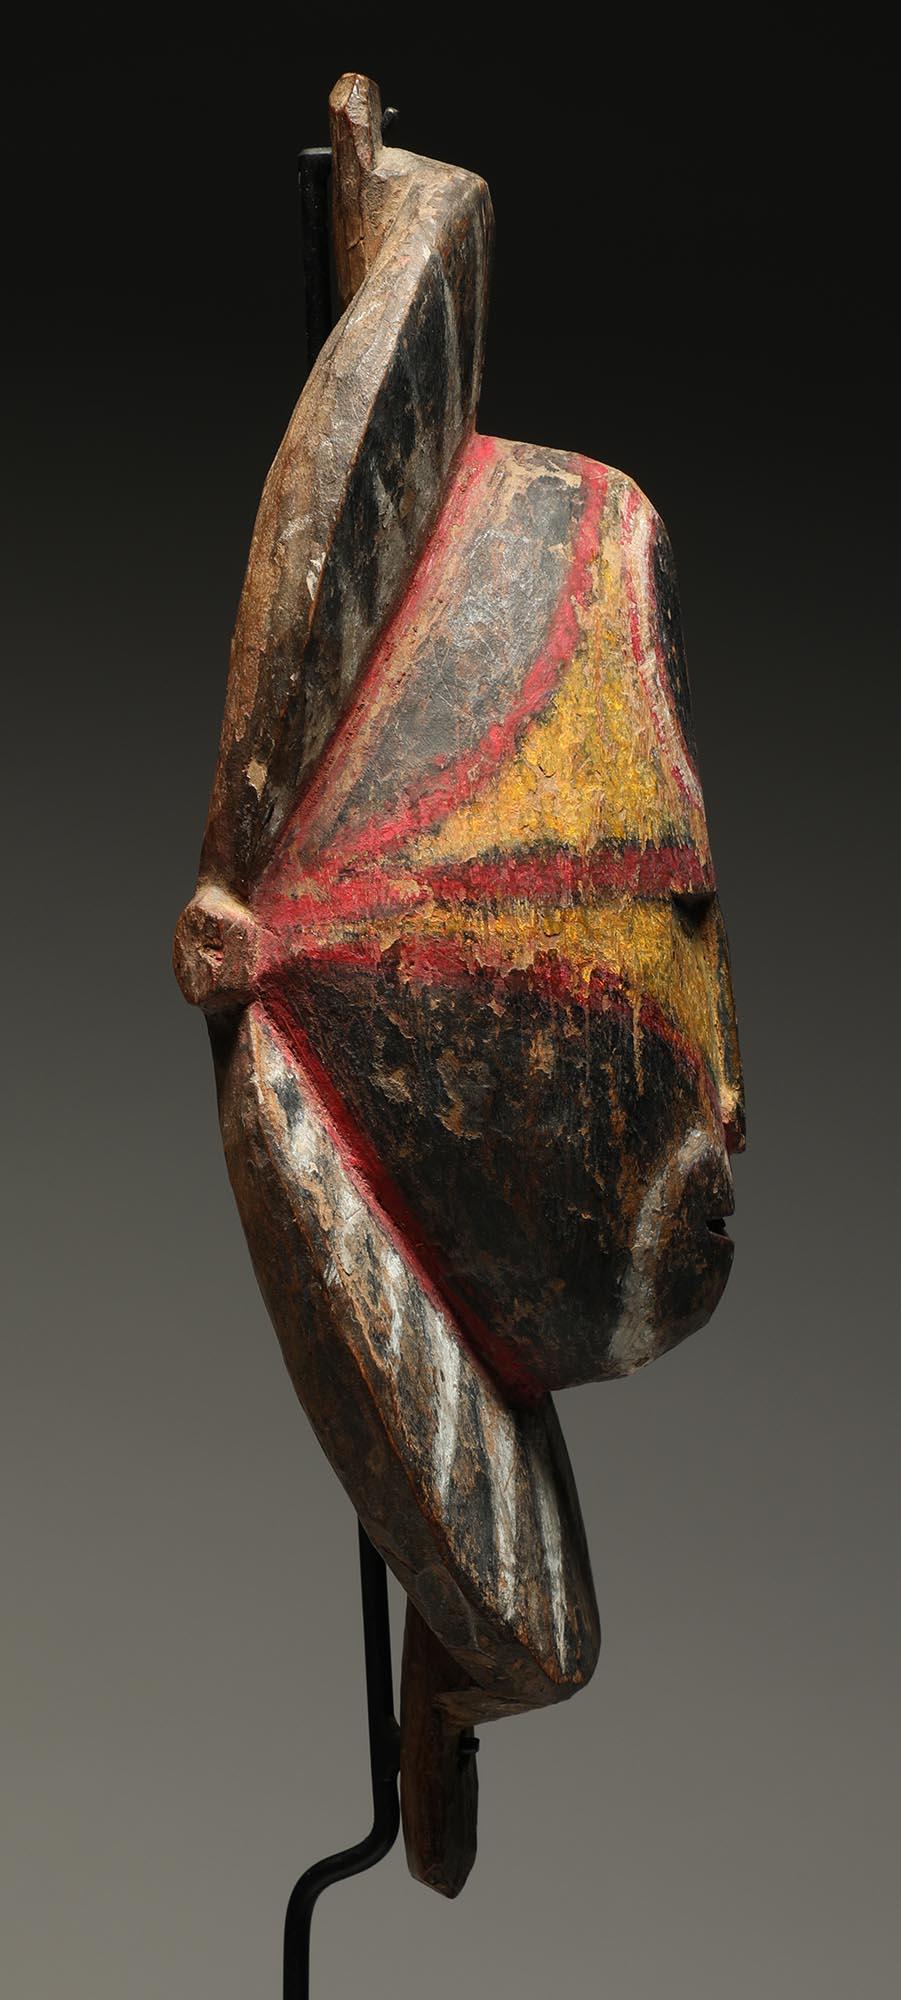 Early Papua New Guinea Sepik hard wood yam mask with areas of yellow, red, black and white pigments. Expressive face.
Mask is 8 1/2 inches high, on custom metal base total height 12 inches.

